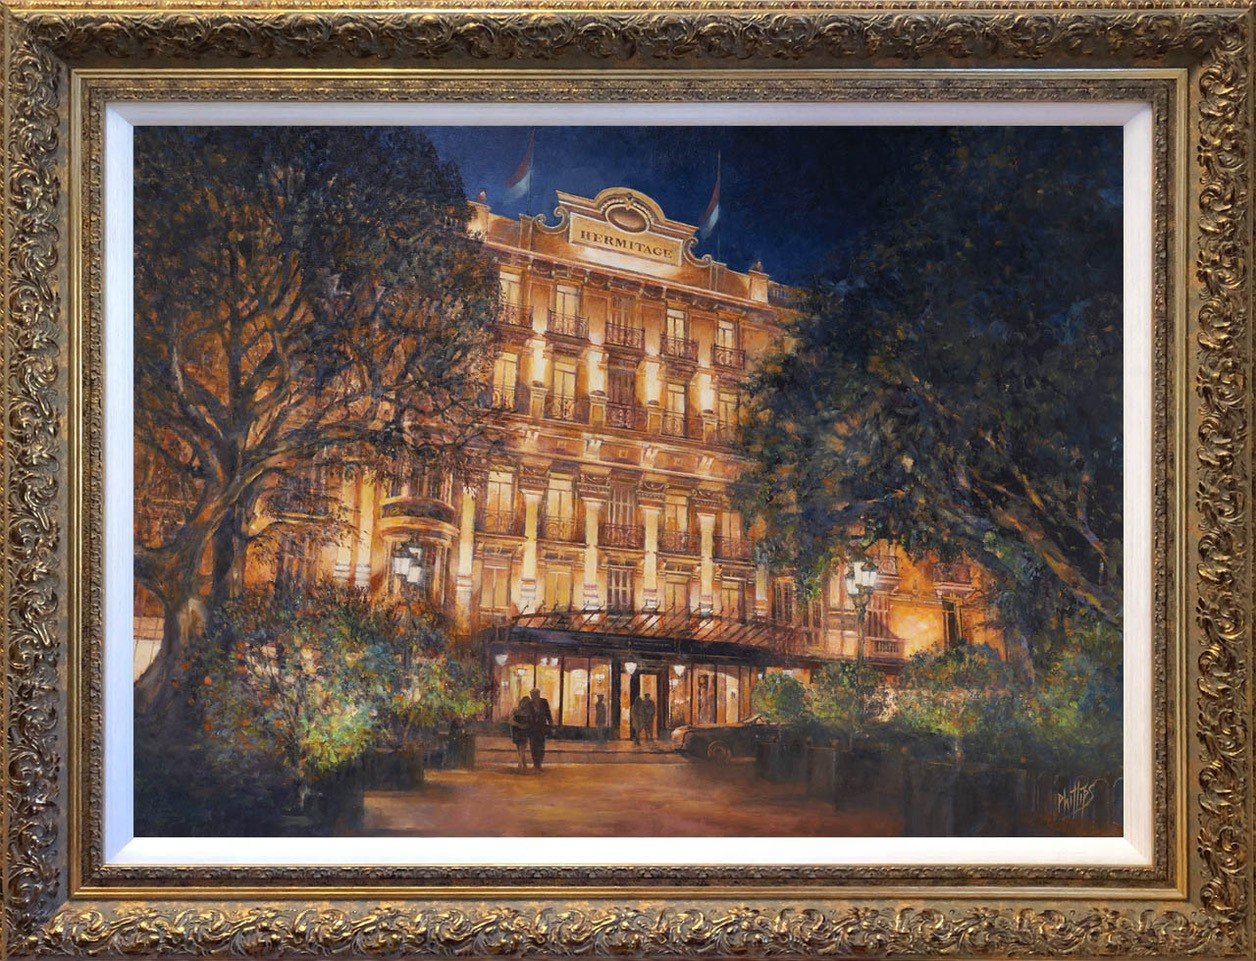 Painting of The Hermitage at nighttime.